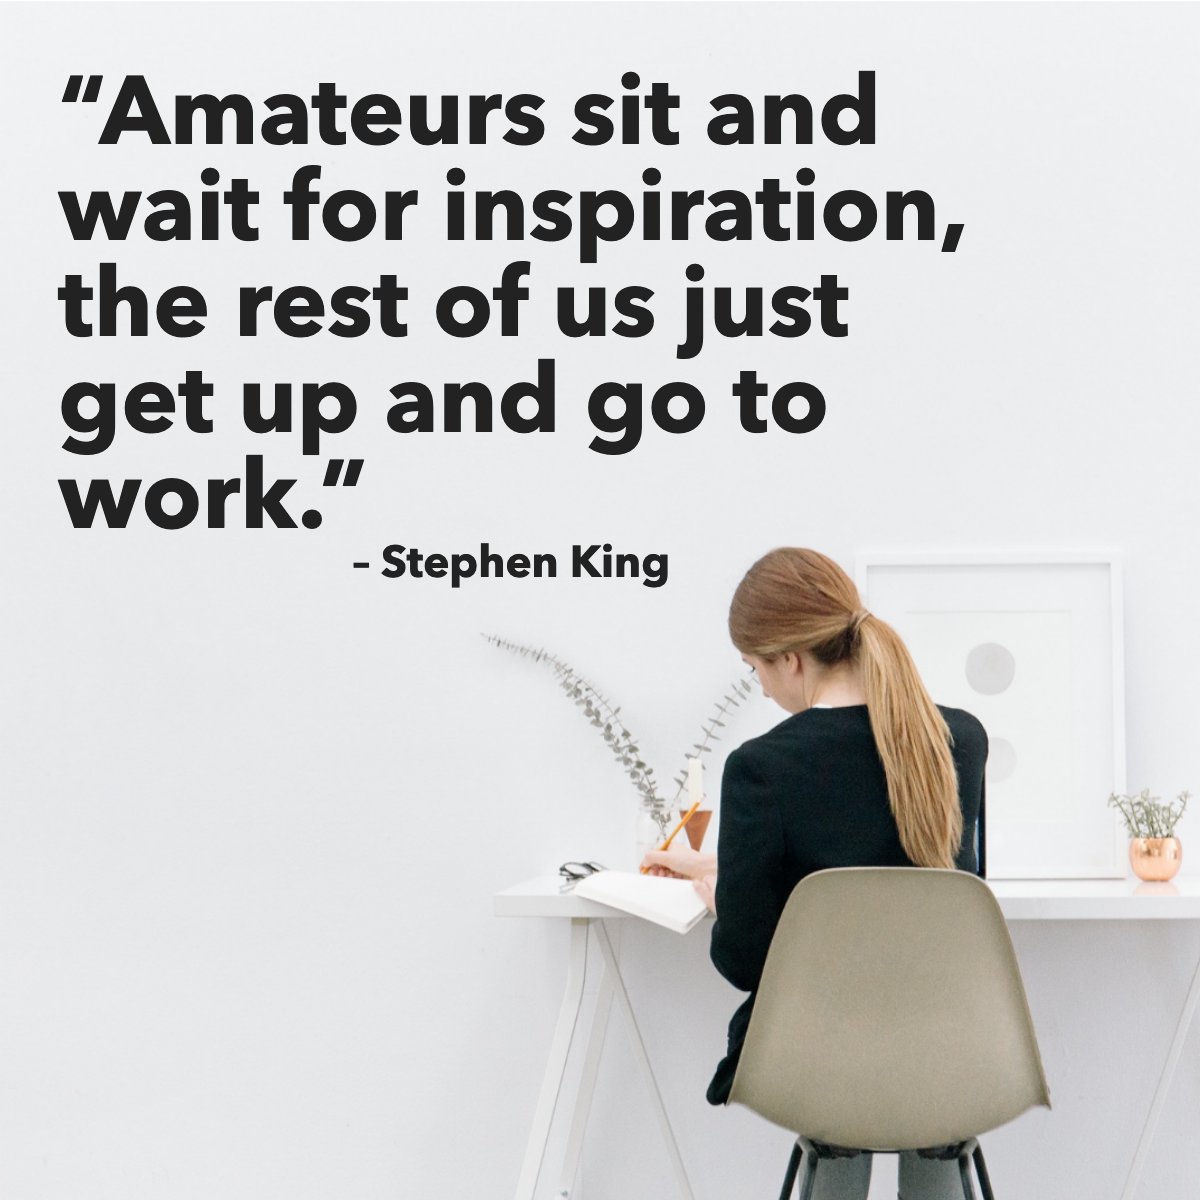 What makes you feel inspired ✍👨‍💻

#workinspirations #working #inspirationalquote